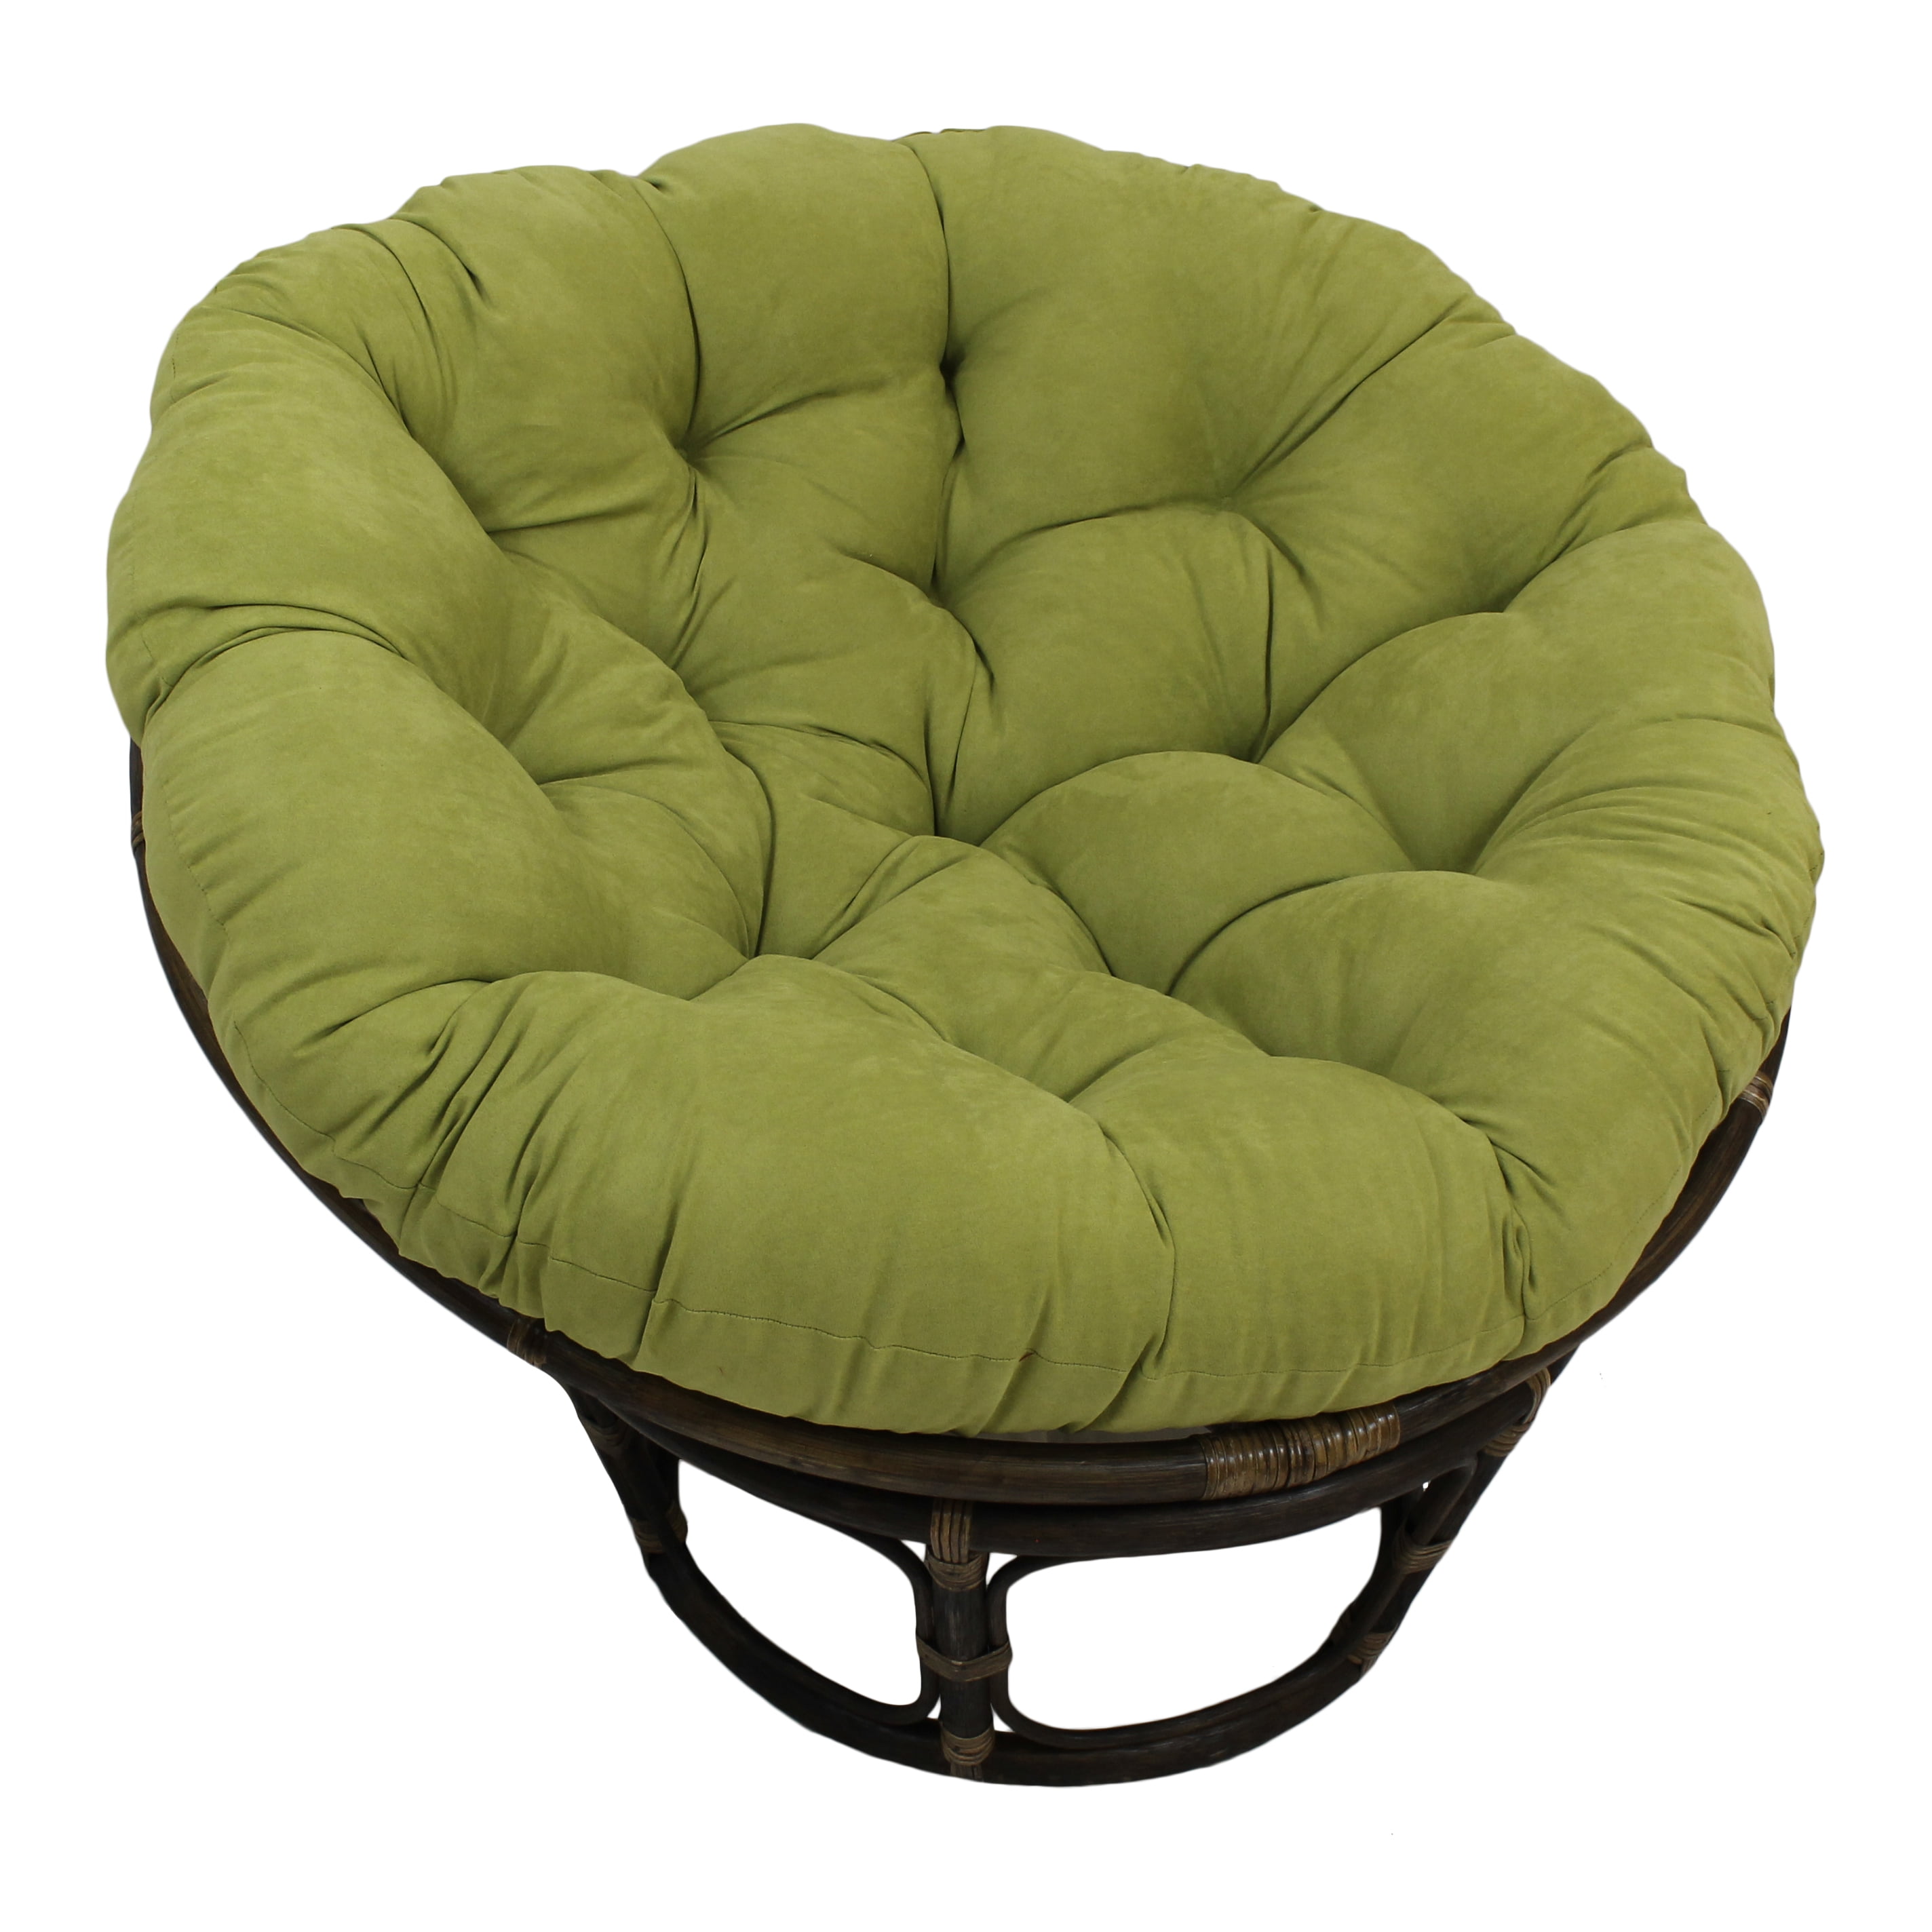 Blazing Needles 44-inch Solid Micro Suede Papasan Chair Cushion Mojito Lime New 